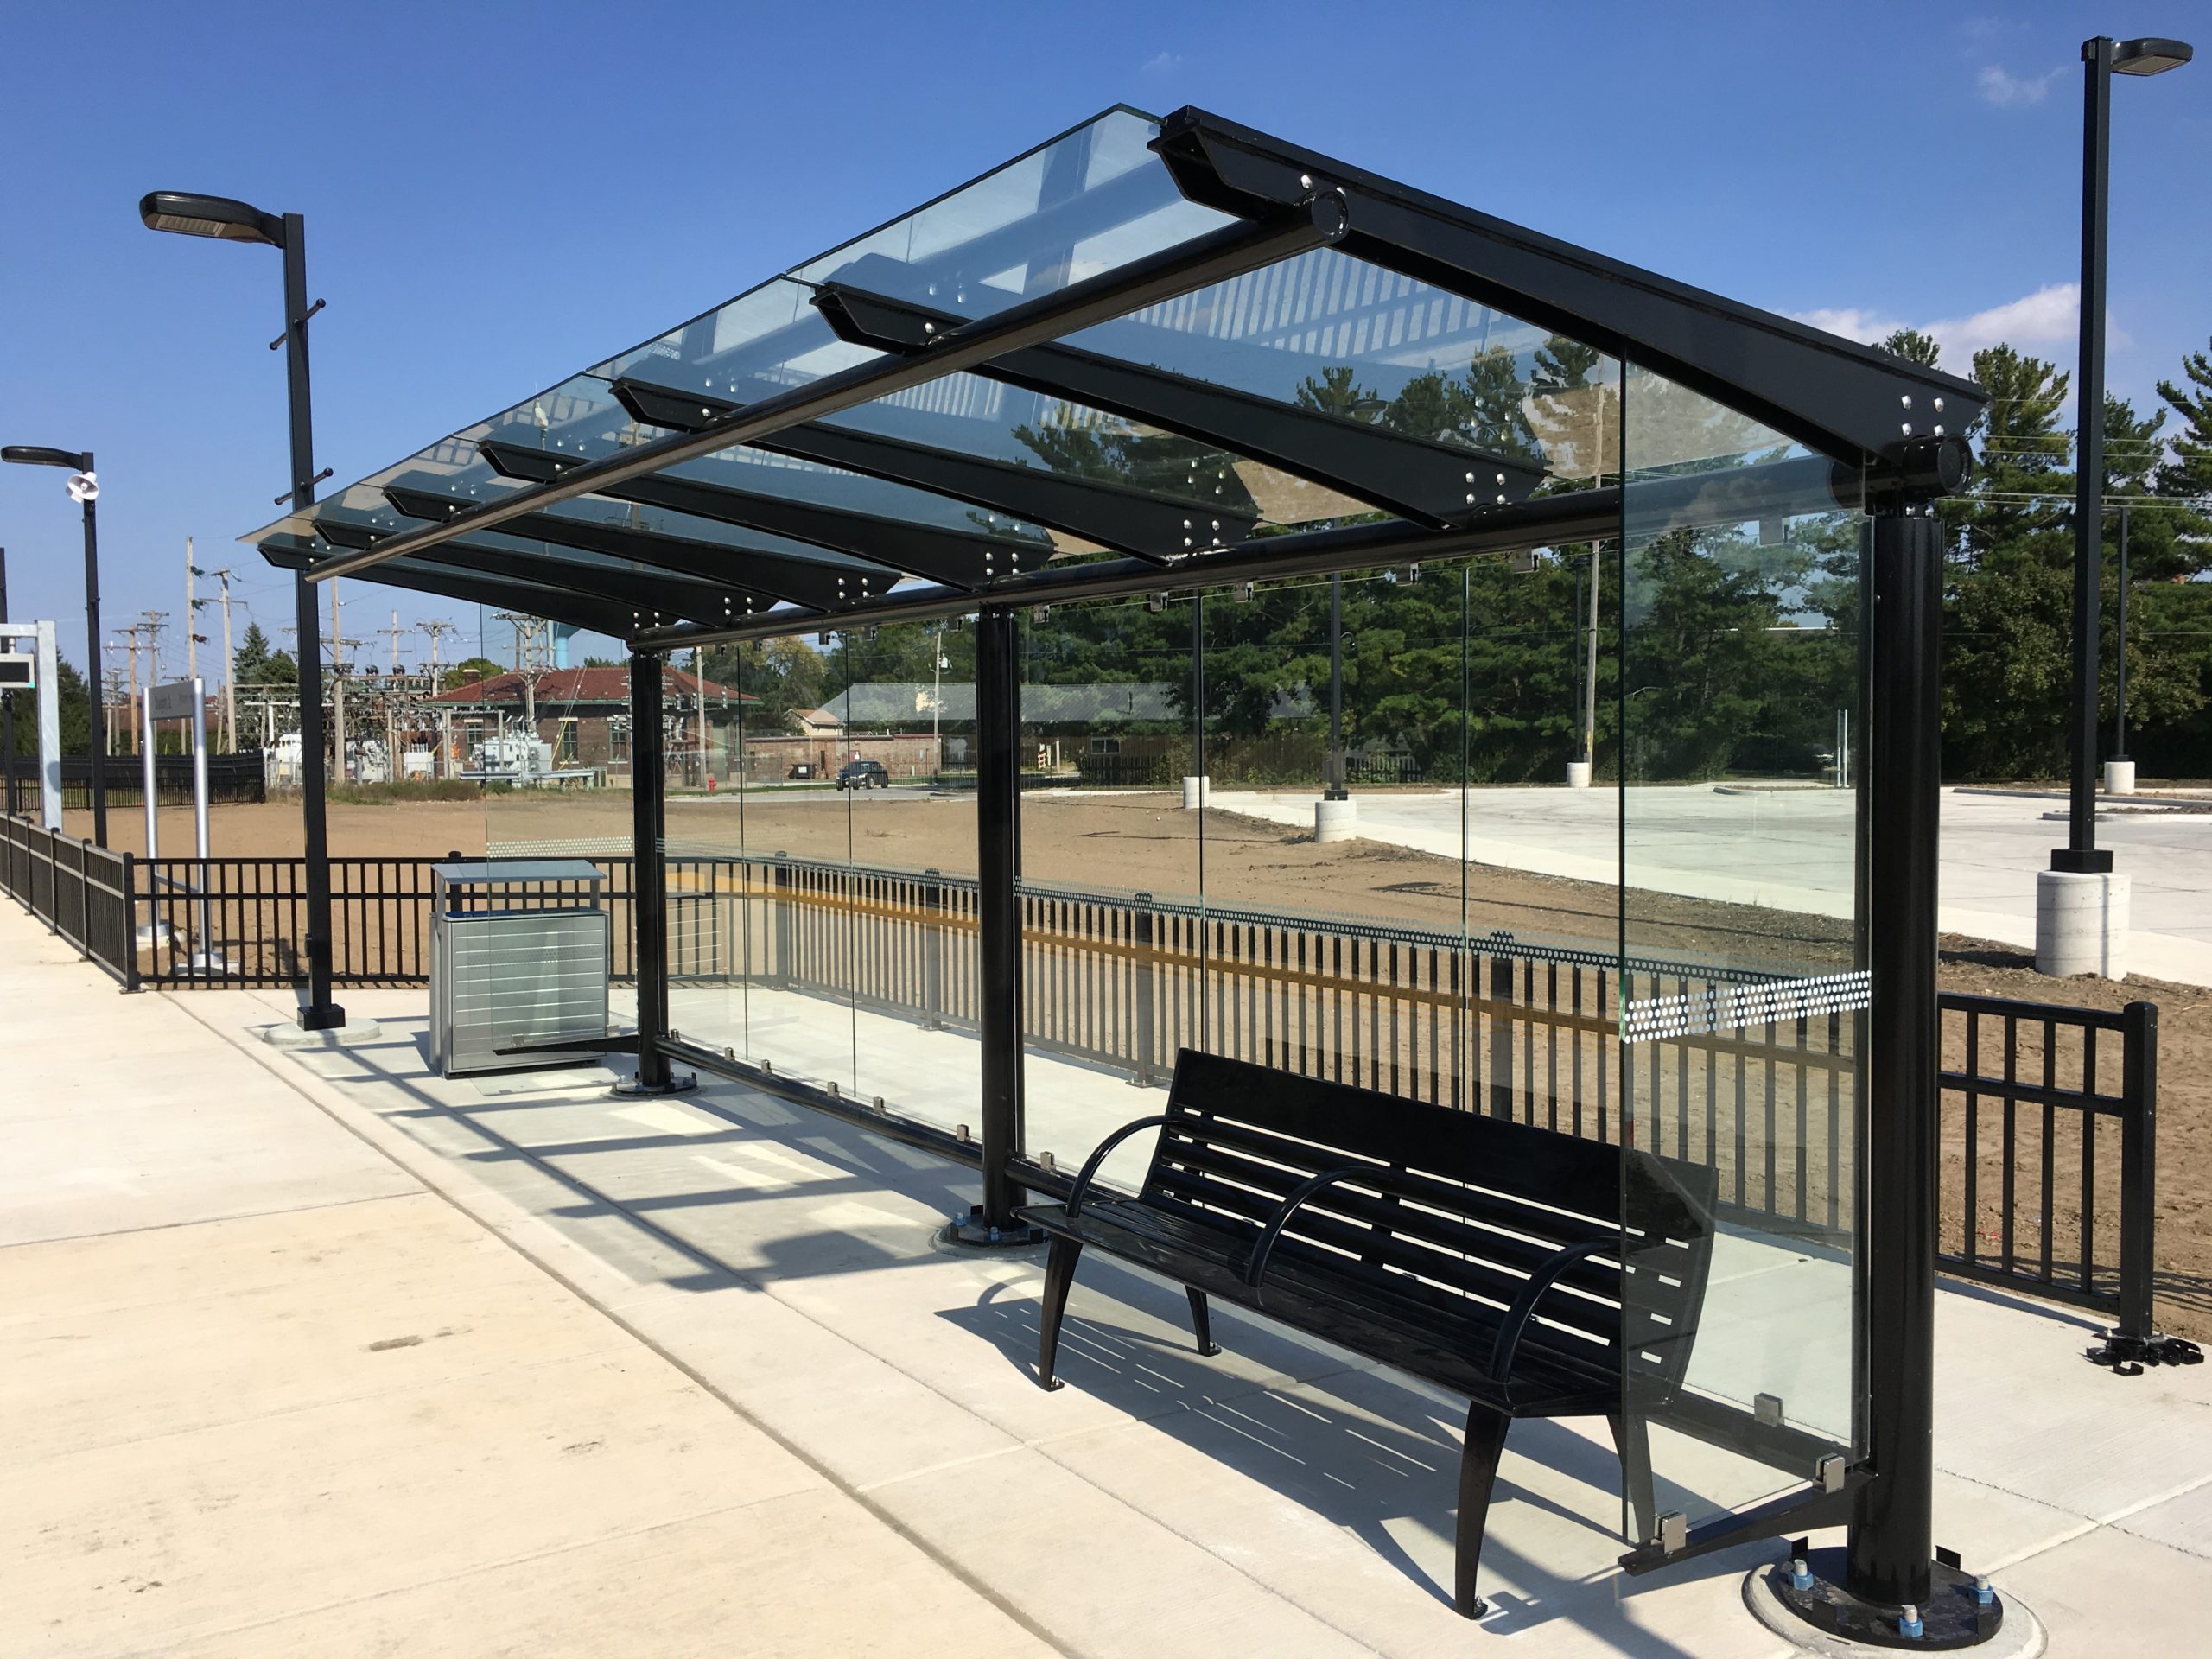 Glass transit stop with black bench